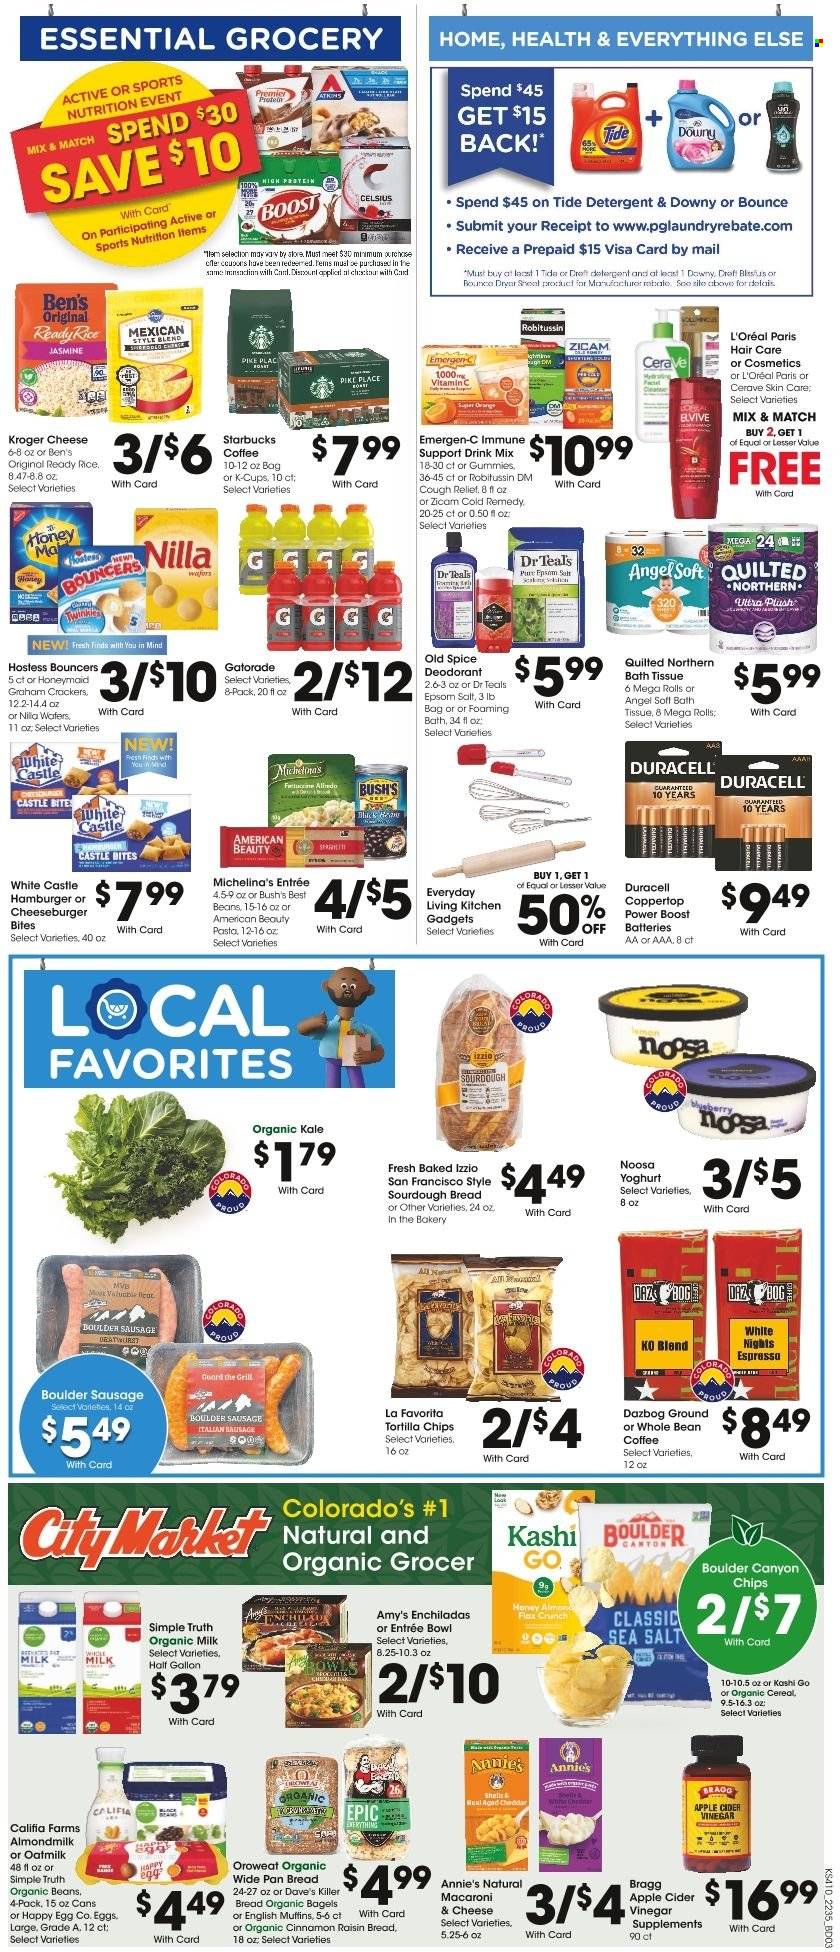 thumbnail - City Market Flyer - 09/28/2022 - 10/04/2022 - Sales products - bagels, english muffins, sourdough bread, kale, oranges, enchiladas, macaroni & cheese, hamburger, pasta, cheeseburger, Annie's, sausage, italian sausage, yoghurt, almond milk, organic milk, oat milk, eggs, graham crackers, crackers, tortilla chips, chips, cereals, rice, spice, apple cider vinegar, honey, Gatorade, Boost, coffee, Starbucks, coffee capsules, K-Cups, Castle, bath tissue, Quilted Northern, detergent, Tide, Bounce, Old Spice, CeraVe, L’Oréal, anti-perspirant, deodorant, pan, battery, Duracell, Robitussin, vitamin c, Emergen-C. Page 6.